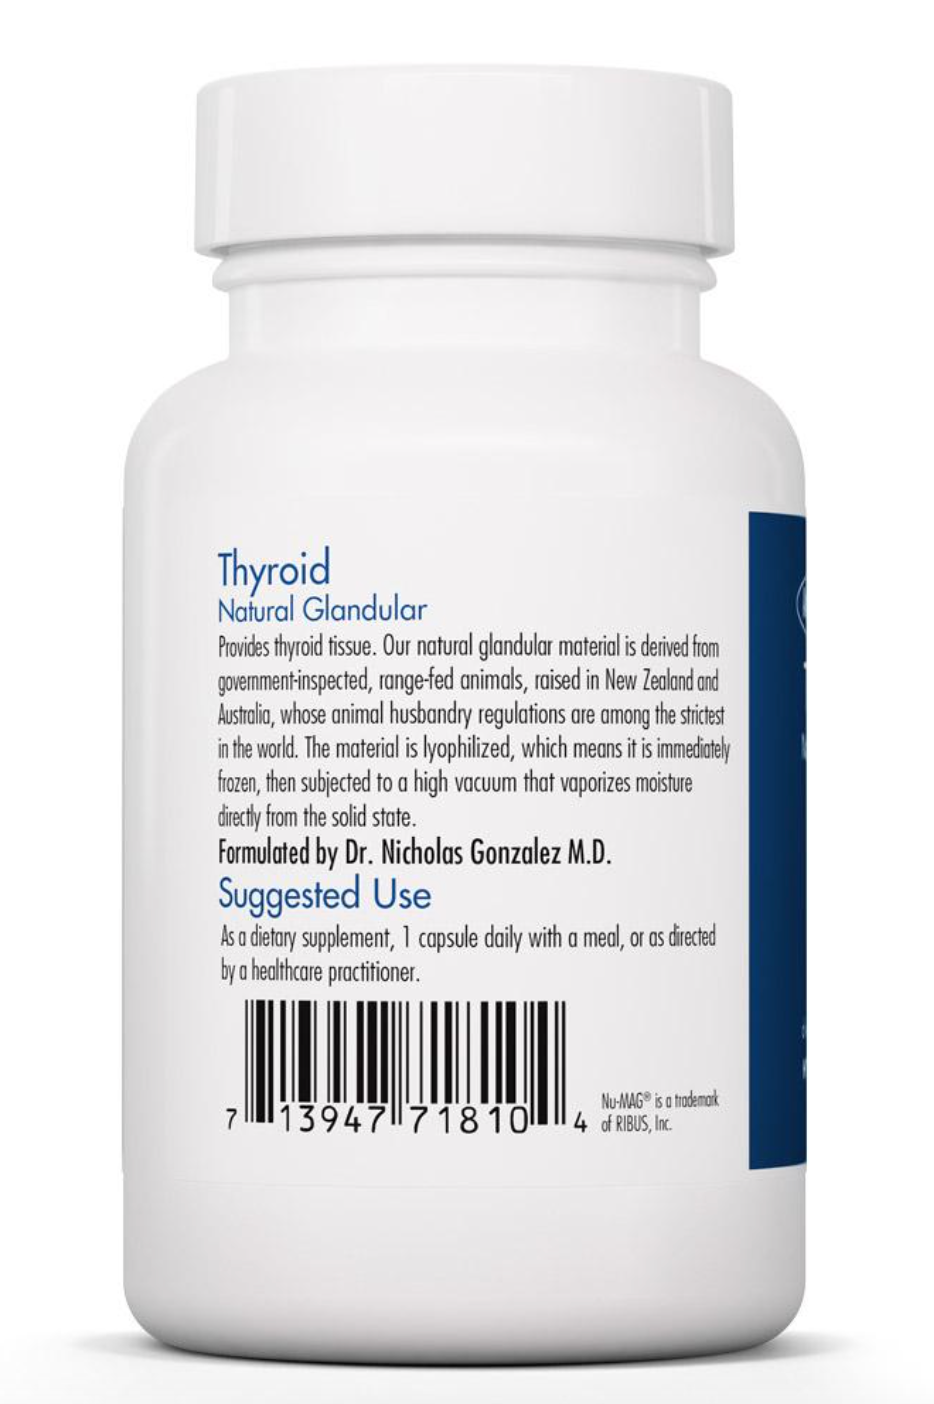 Thyroid Natural Glandular Other Supplements Allergy Research Group   